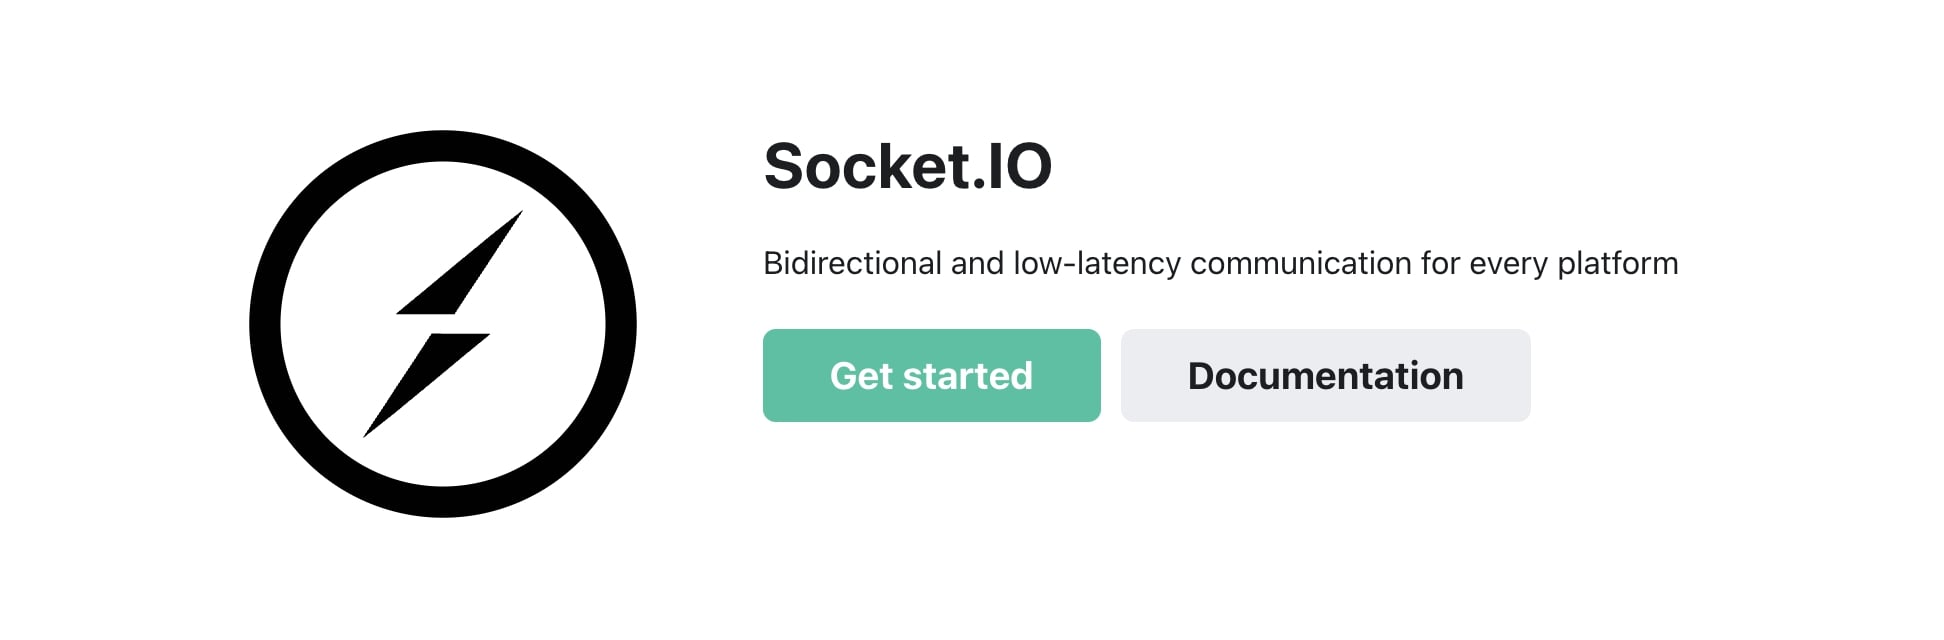 The Socket.IO lightning bolt logo and “Get started” page